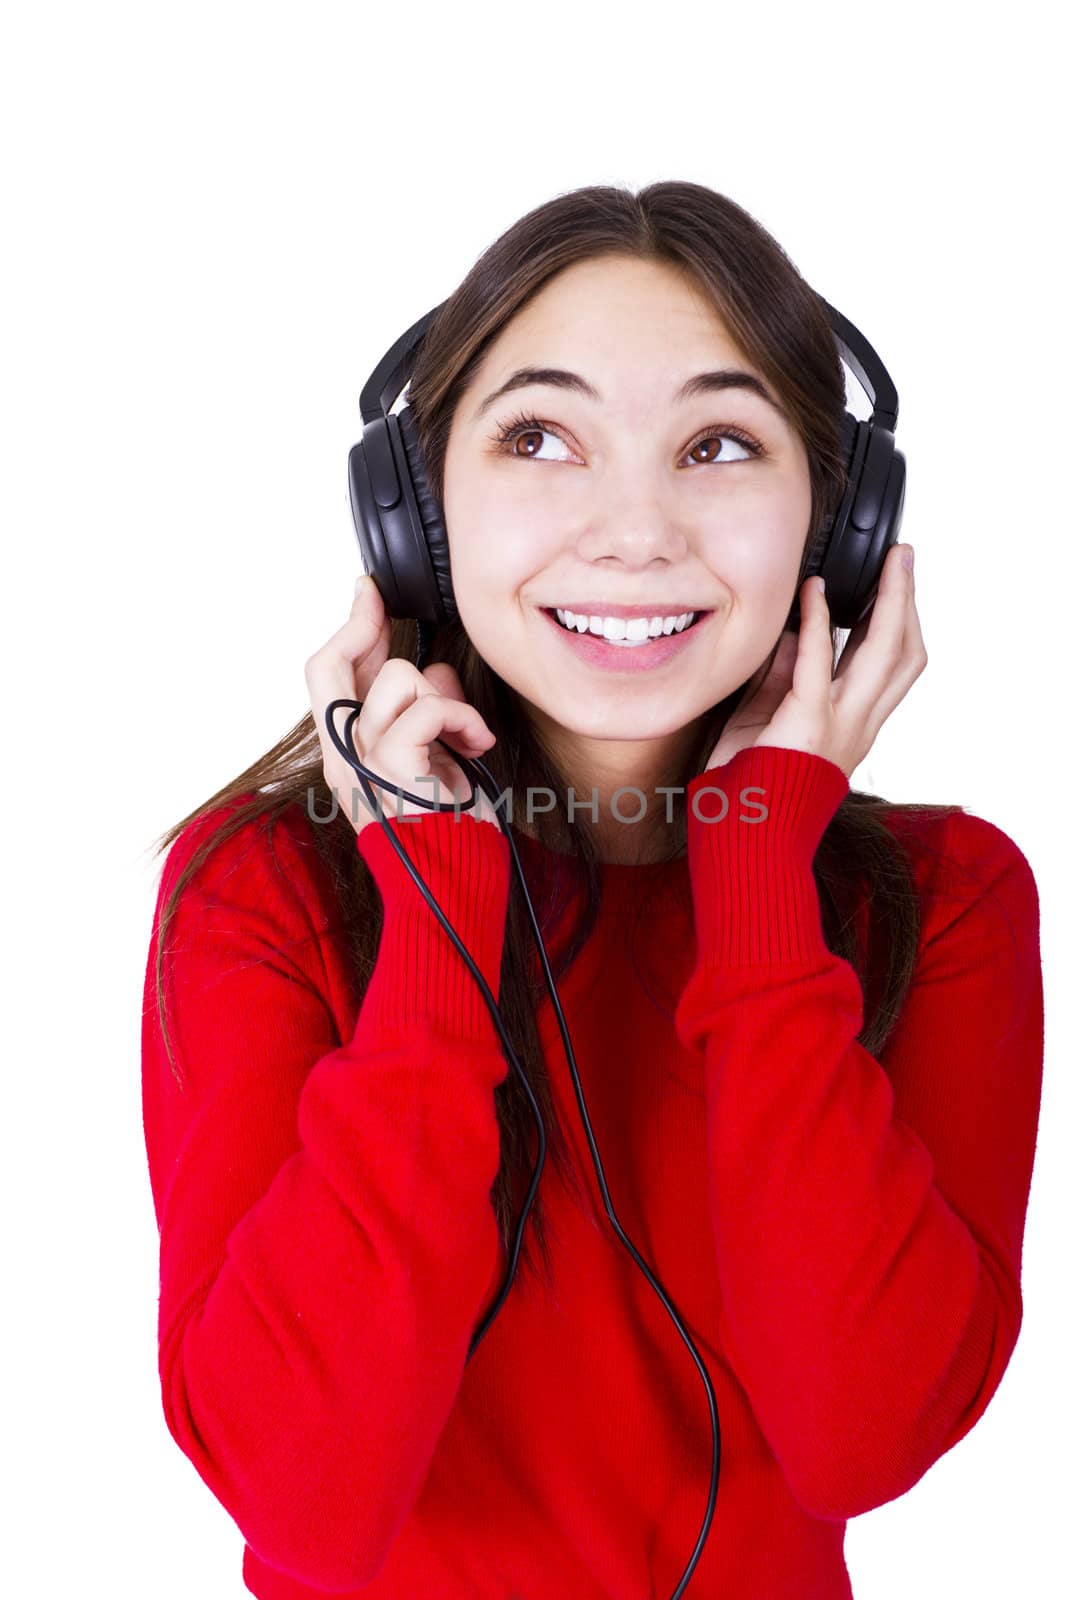 Teenager girl listening music in headphones, looking up to something. She is wearing catchy red clothing relaxed. Isolated on white background.